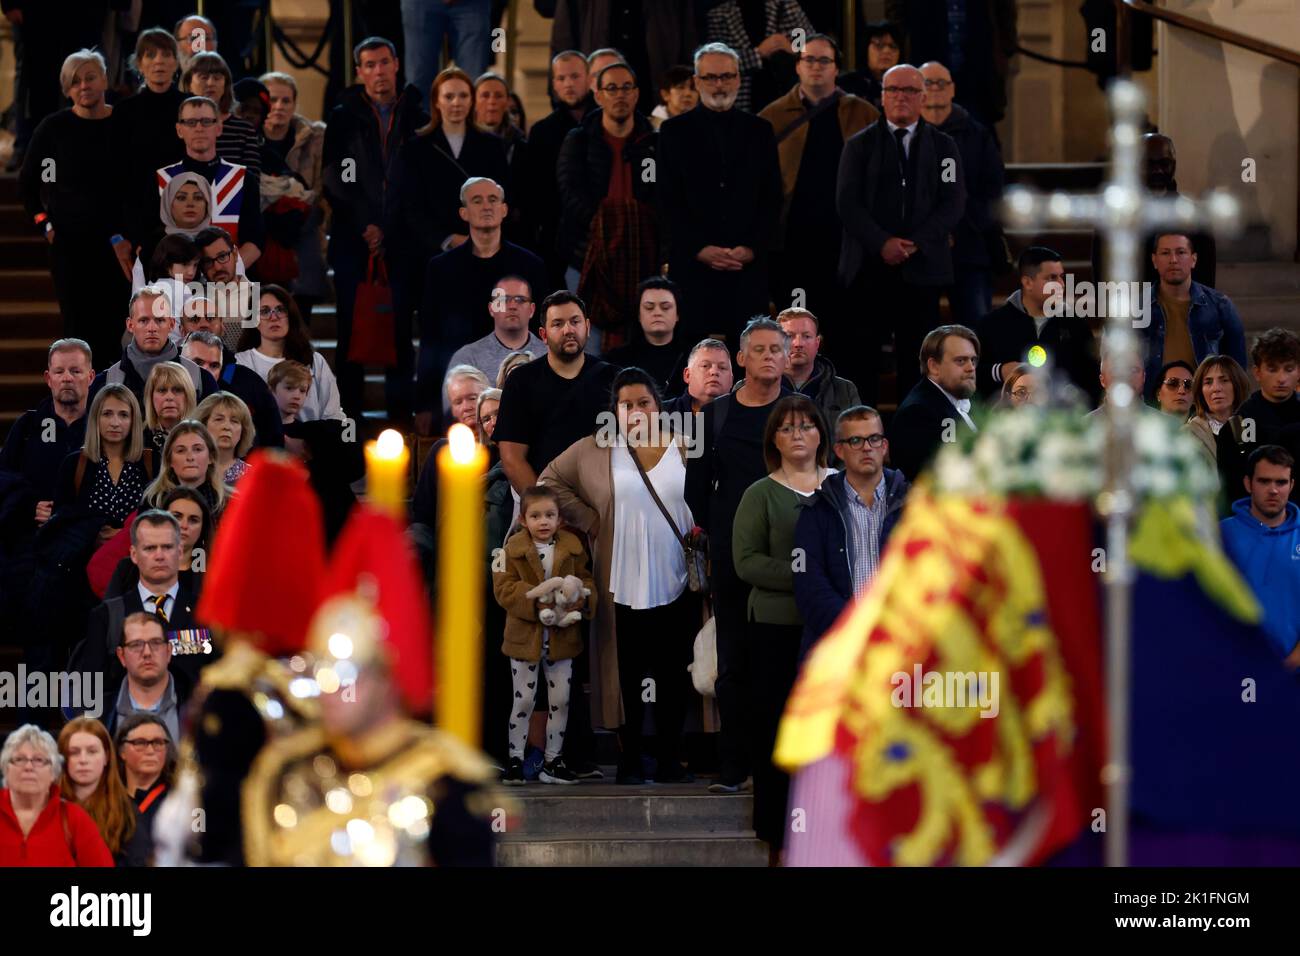 Members of the public view the coffin of Queen Elizabeth II, lying in state on the catafalque in Westminster Hall, at the Palace of Westminster, London, ahead of her funeral on Monday. Picture date: Sunday September 18, 2022. Stock Photo